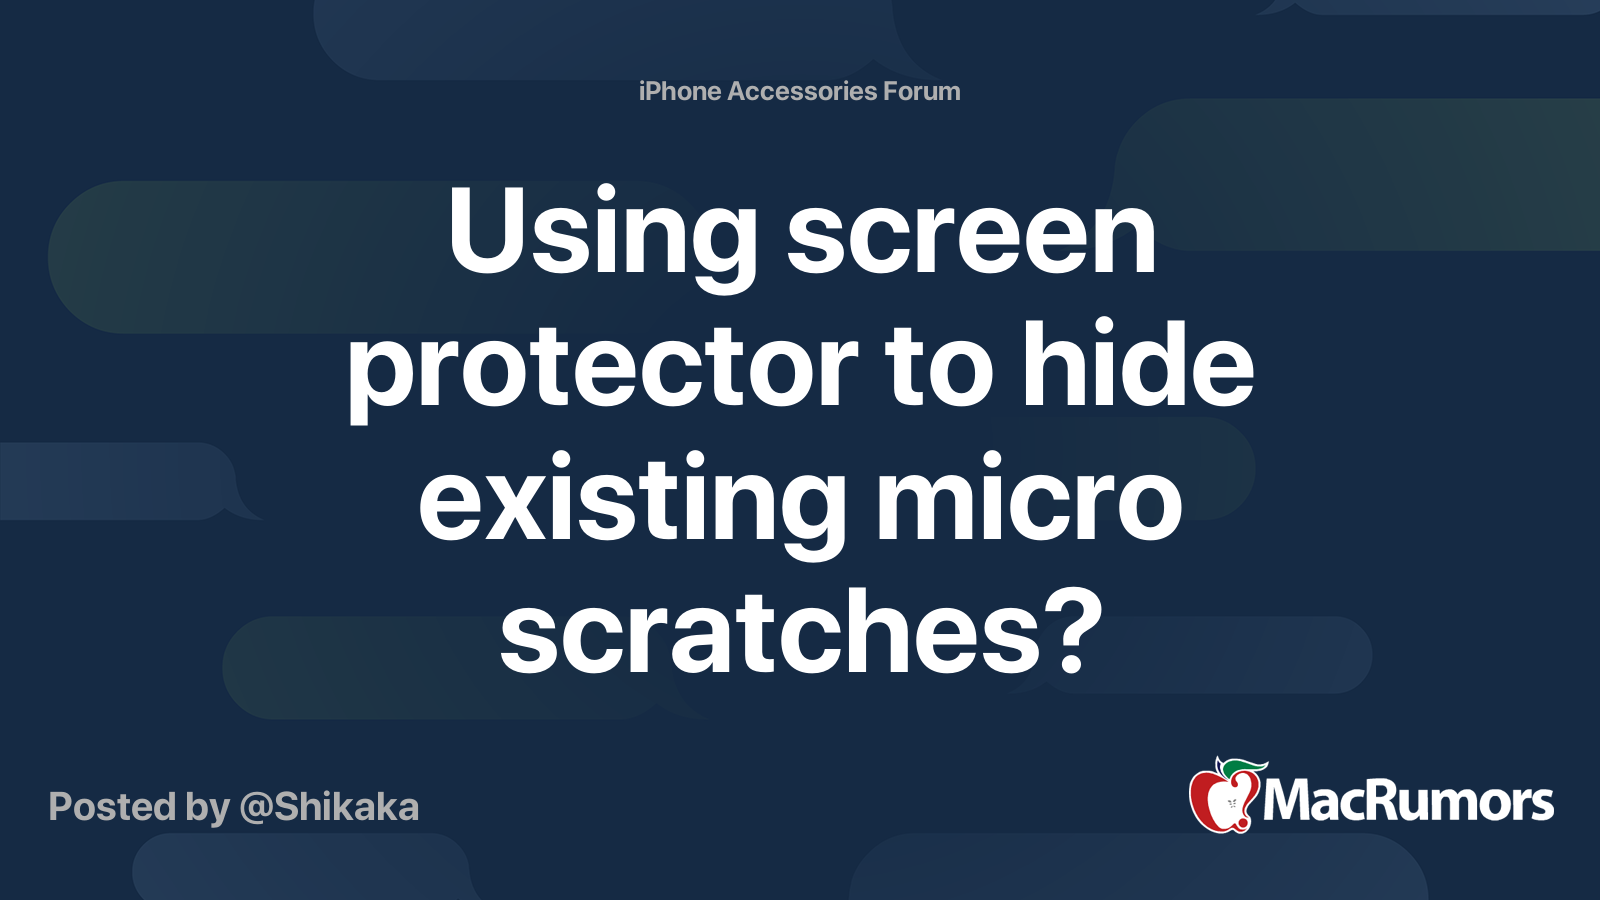 Screen protector that conceal scratches - Apple Community